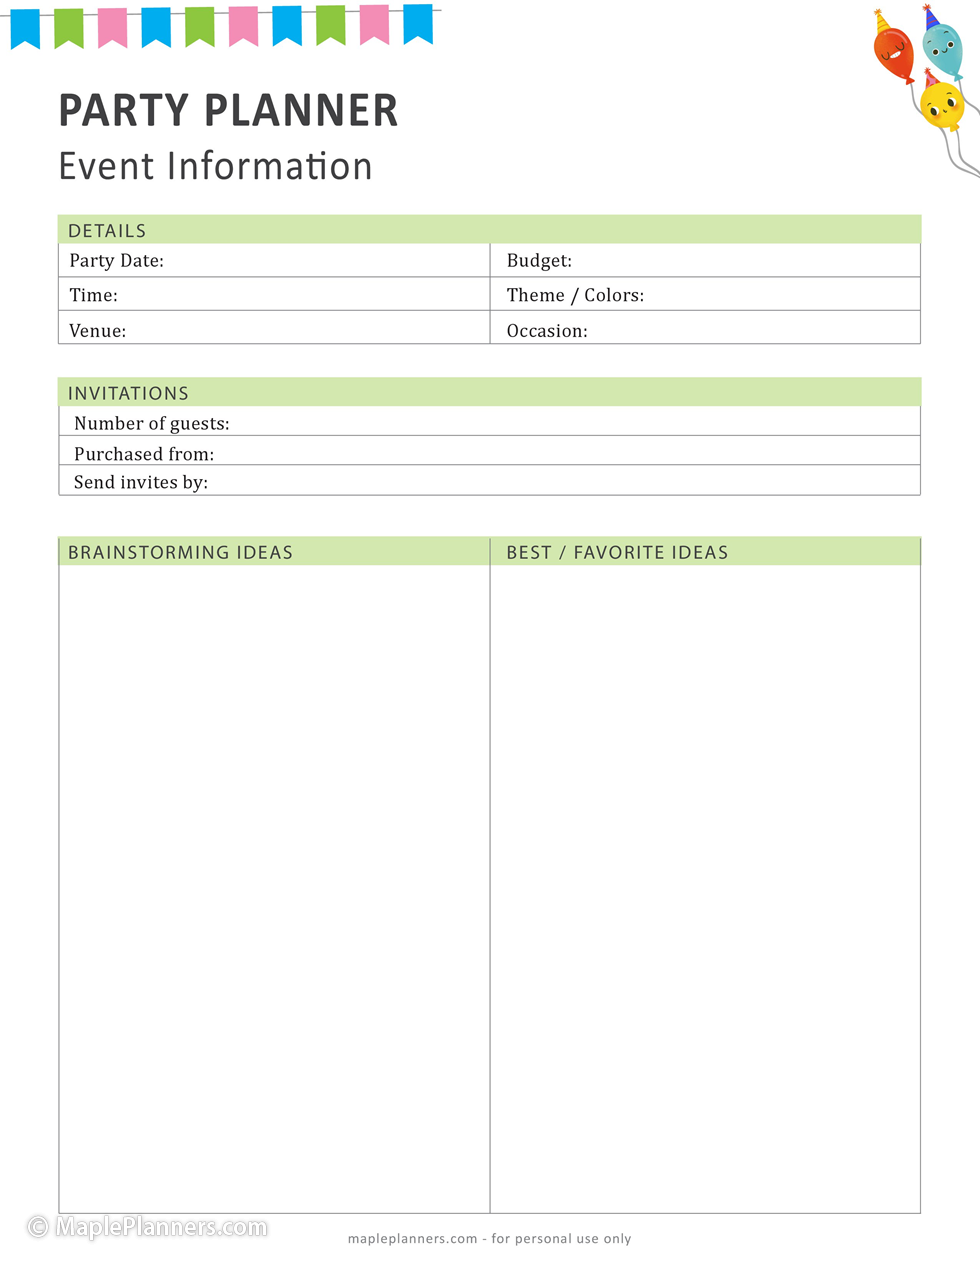 Party Planner Event Information